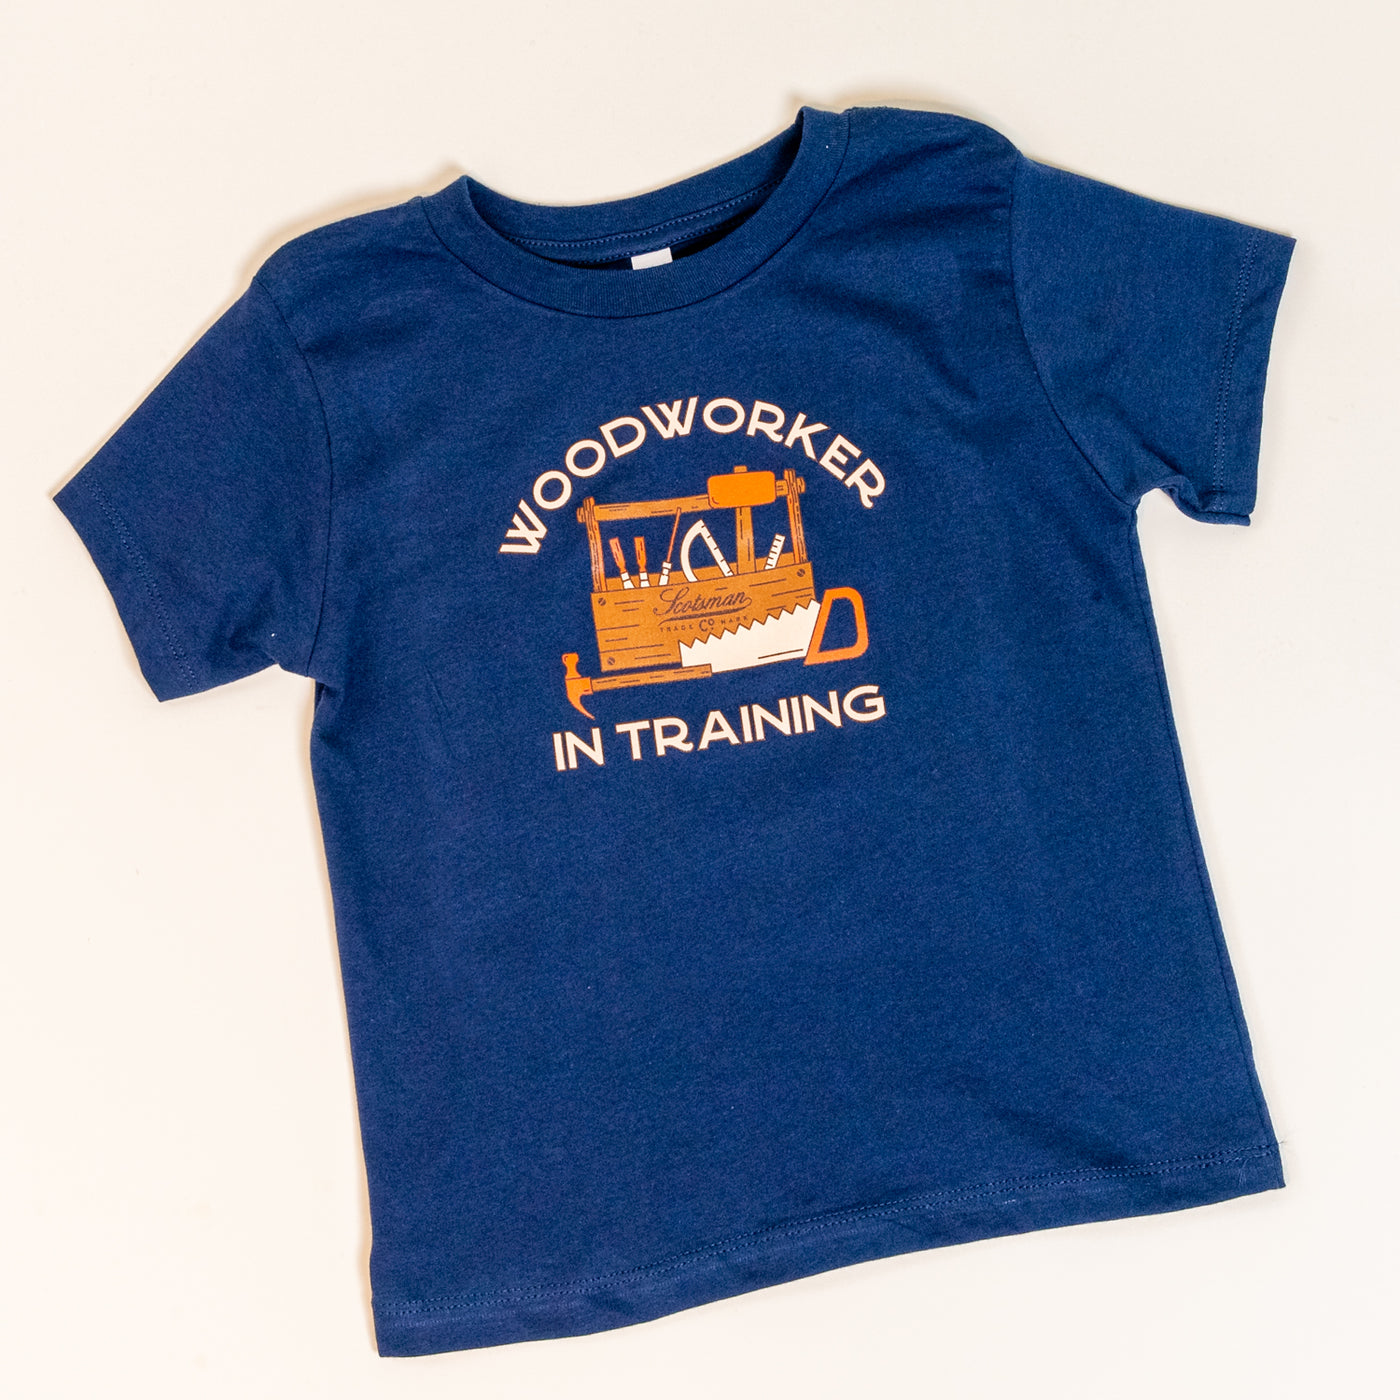 Woodworker in Training Toddler T-Shirt